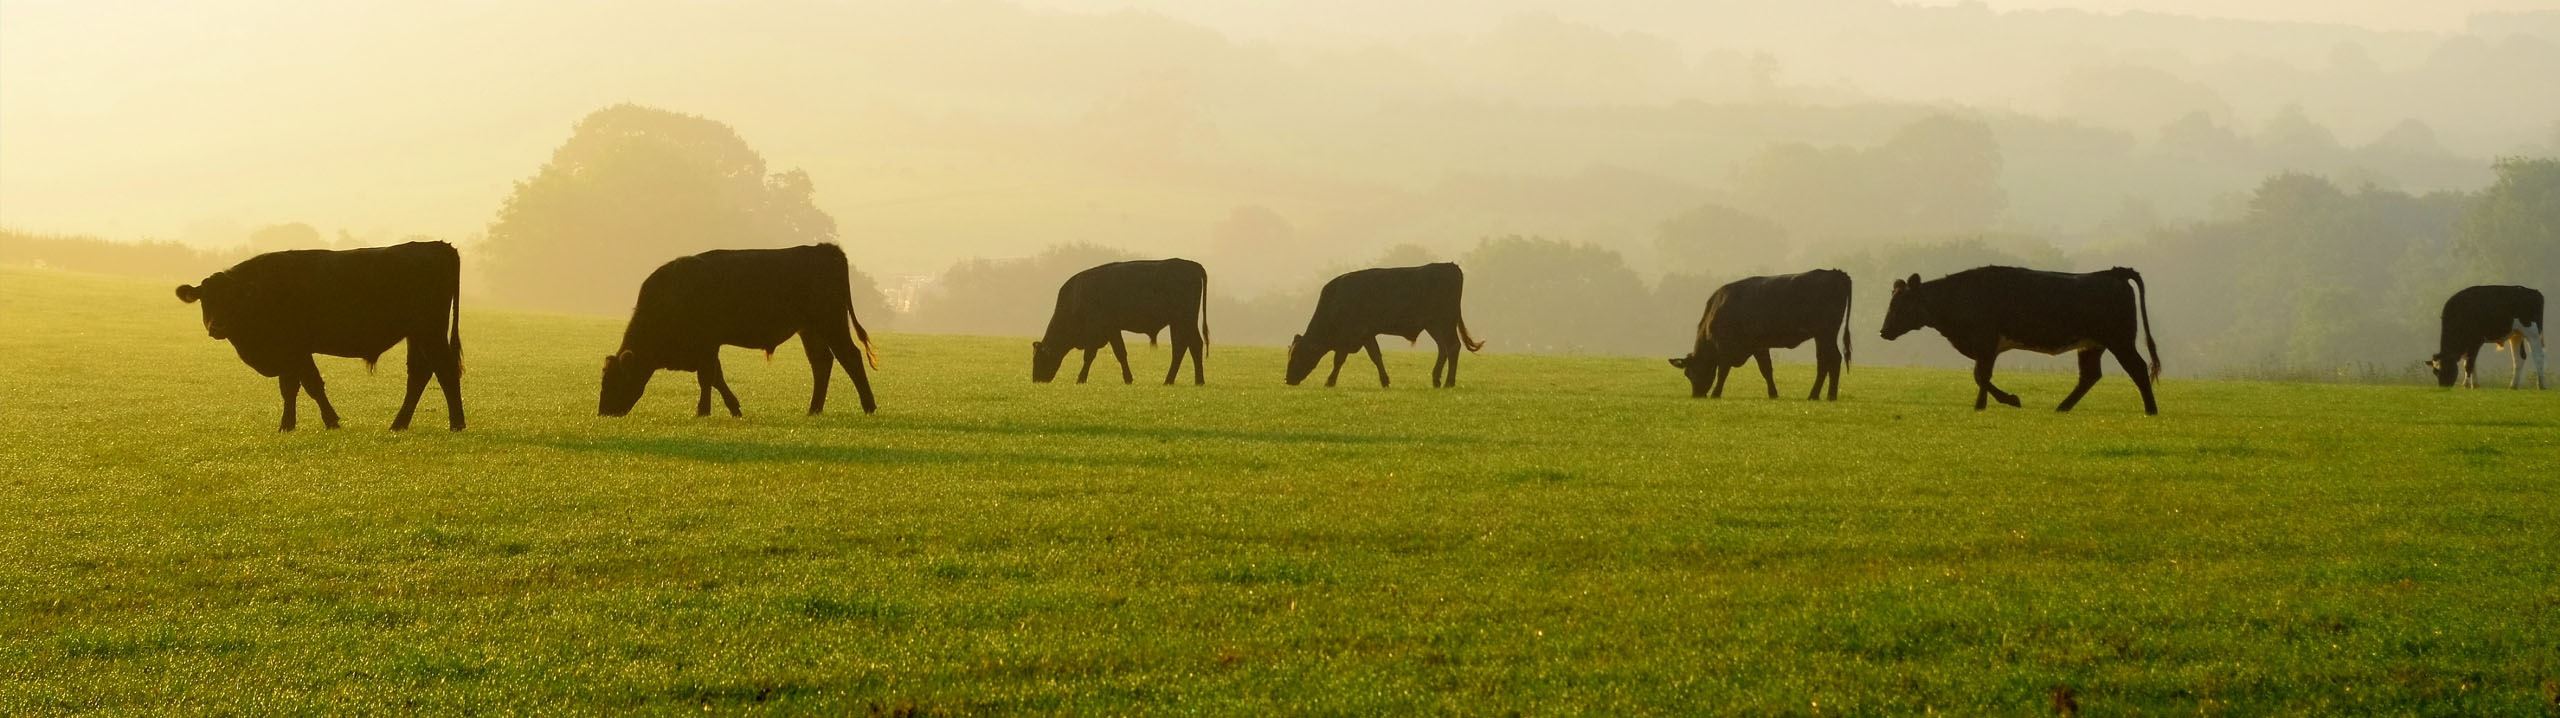 A Field of Cows Eating - Business Banking Promo